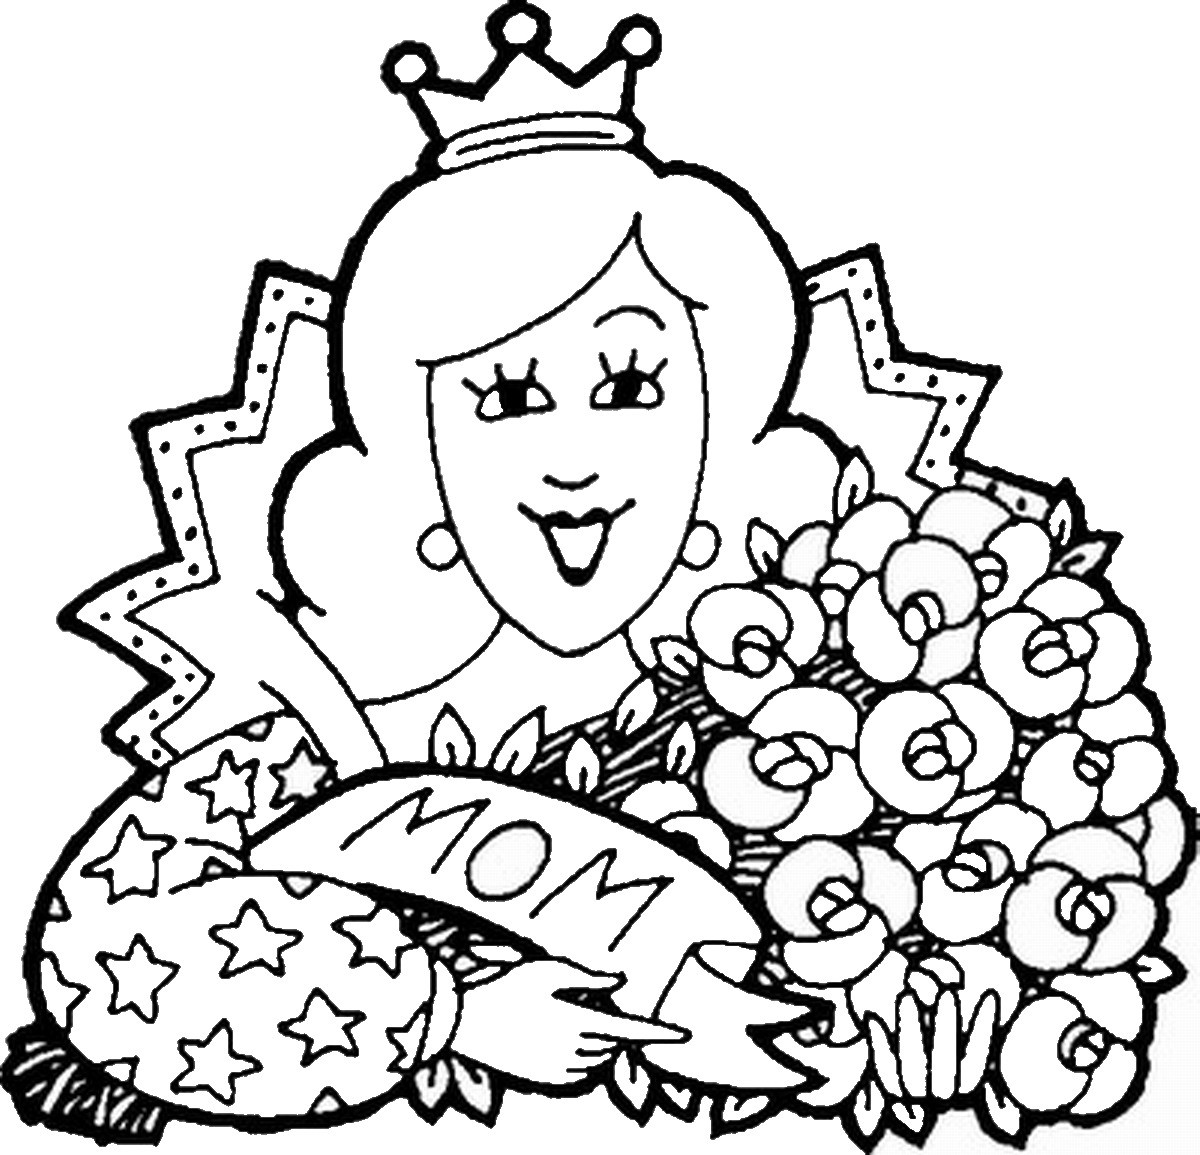 Mothers Day Coloring Sheet
 Mother’s Day Coloring Pages